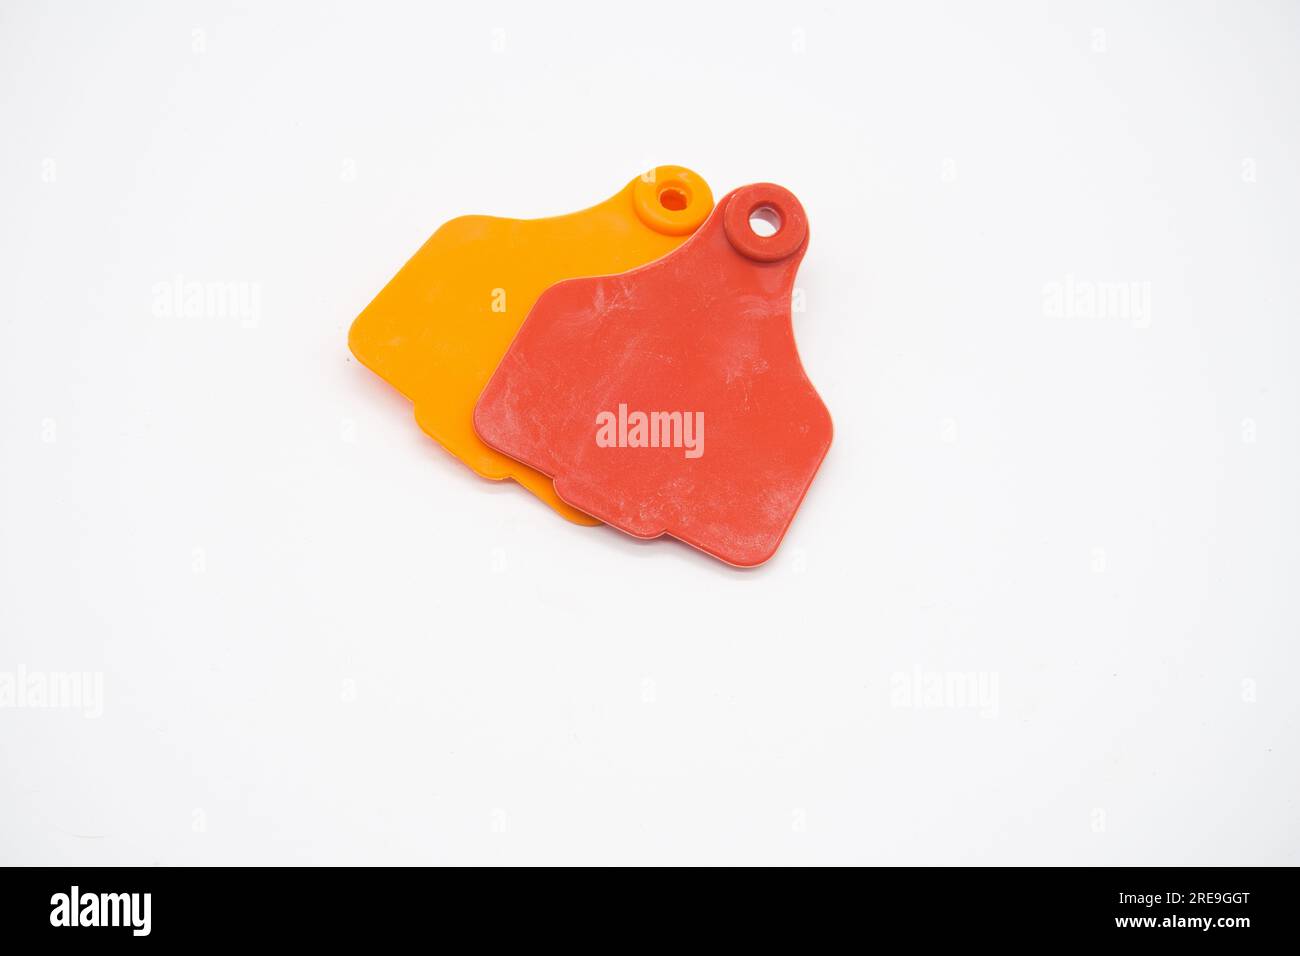 Red and Orange Dewlap Livestock Ear Tags used to identify and track farm livestock such as cows, isolated on white background Stock Photo